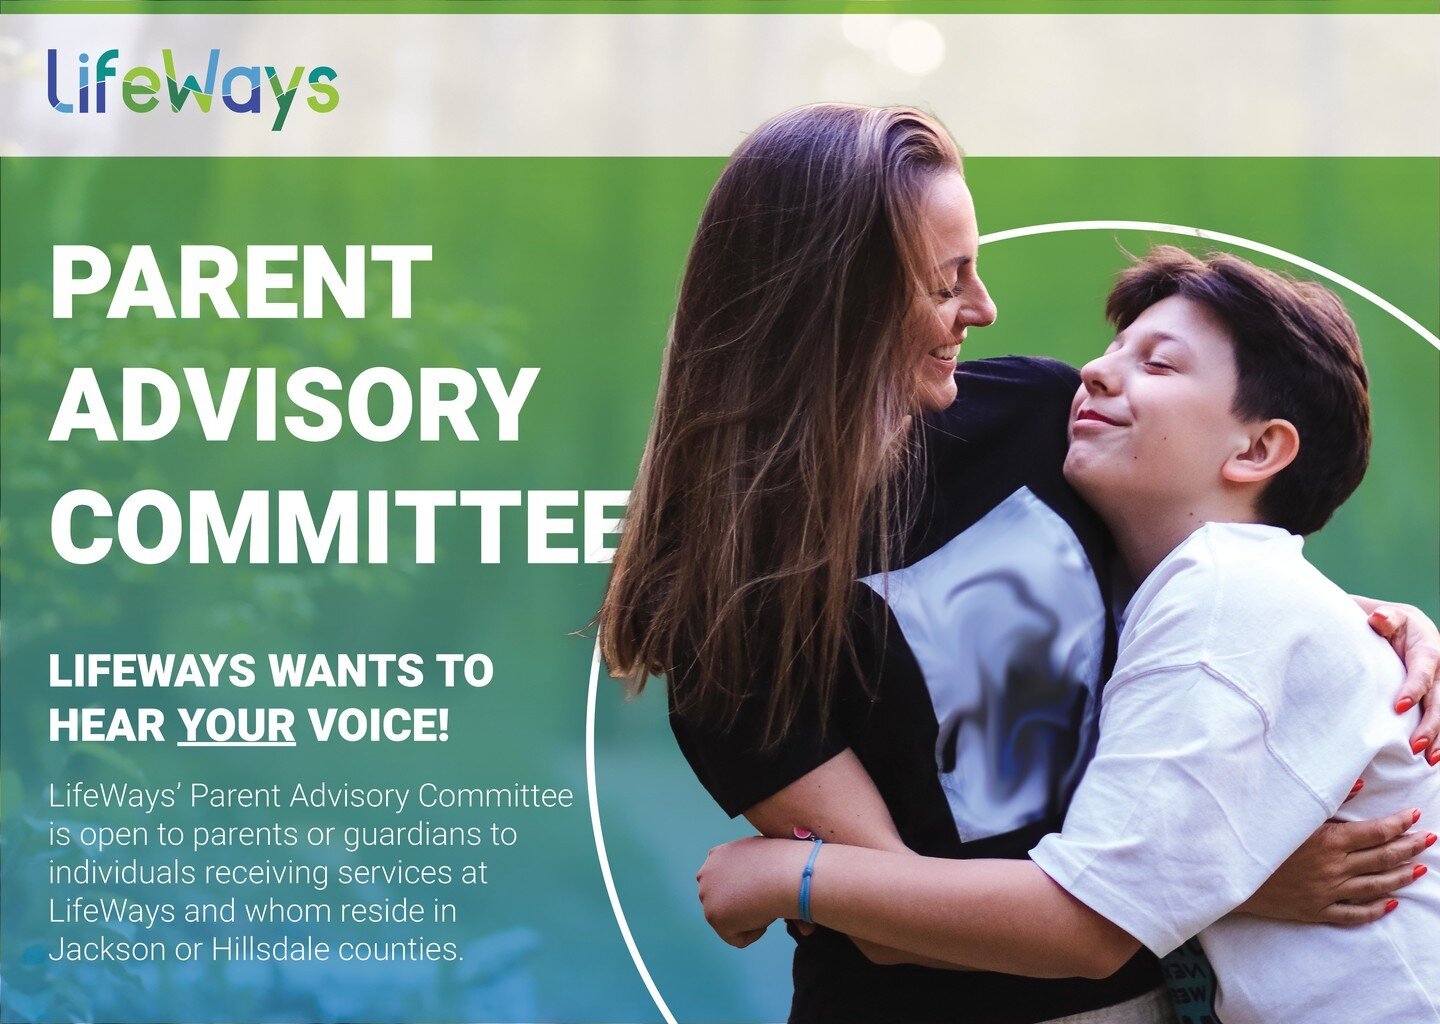 Join our NEW Parent Advisory Committee!

We want to hear YOUR voice! LifeWays&rsquo; Parent Advisory Committee is open to parents or guardians to individuals receiving services at LifeWays and whom reside in Jackson or Hillsdale counties.

If you are